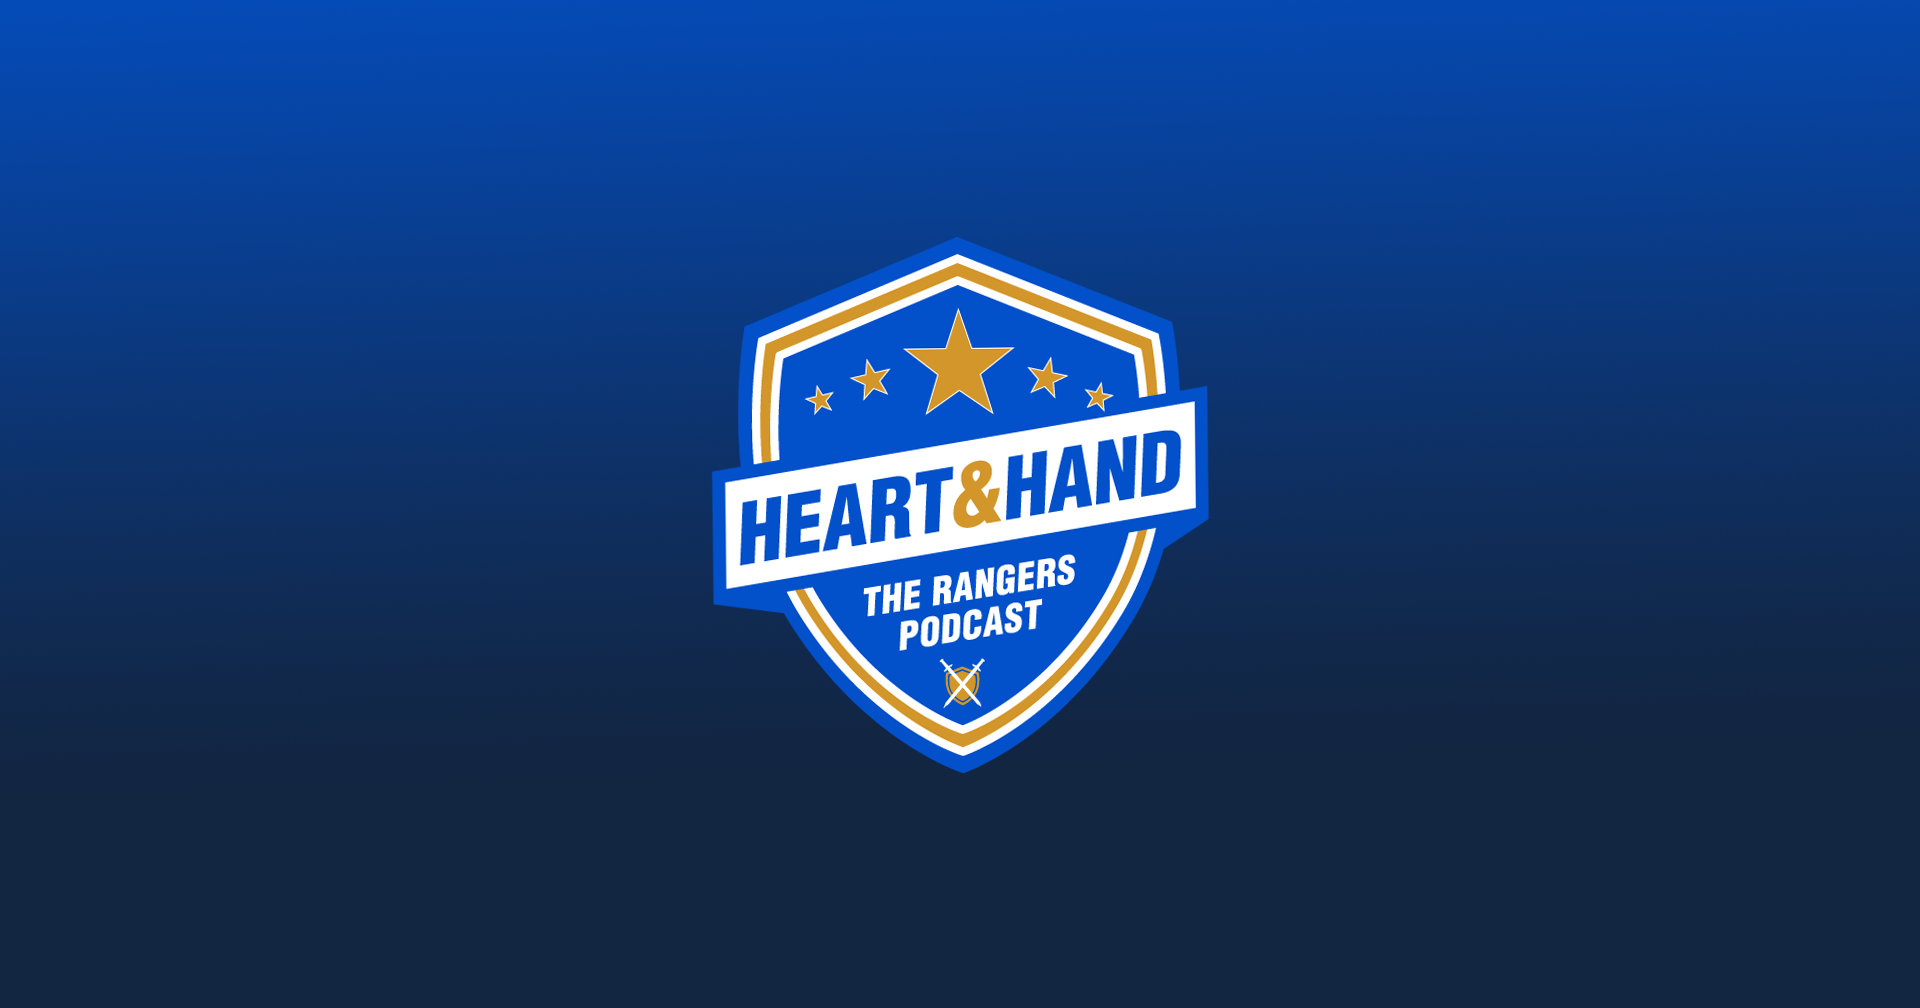 heartandhand.co.uk